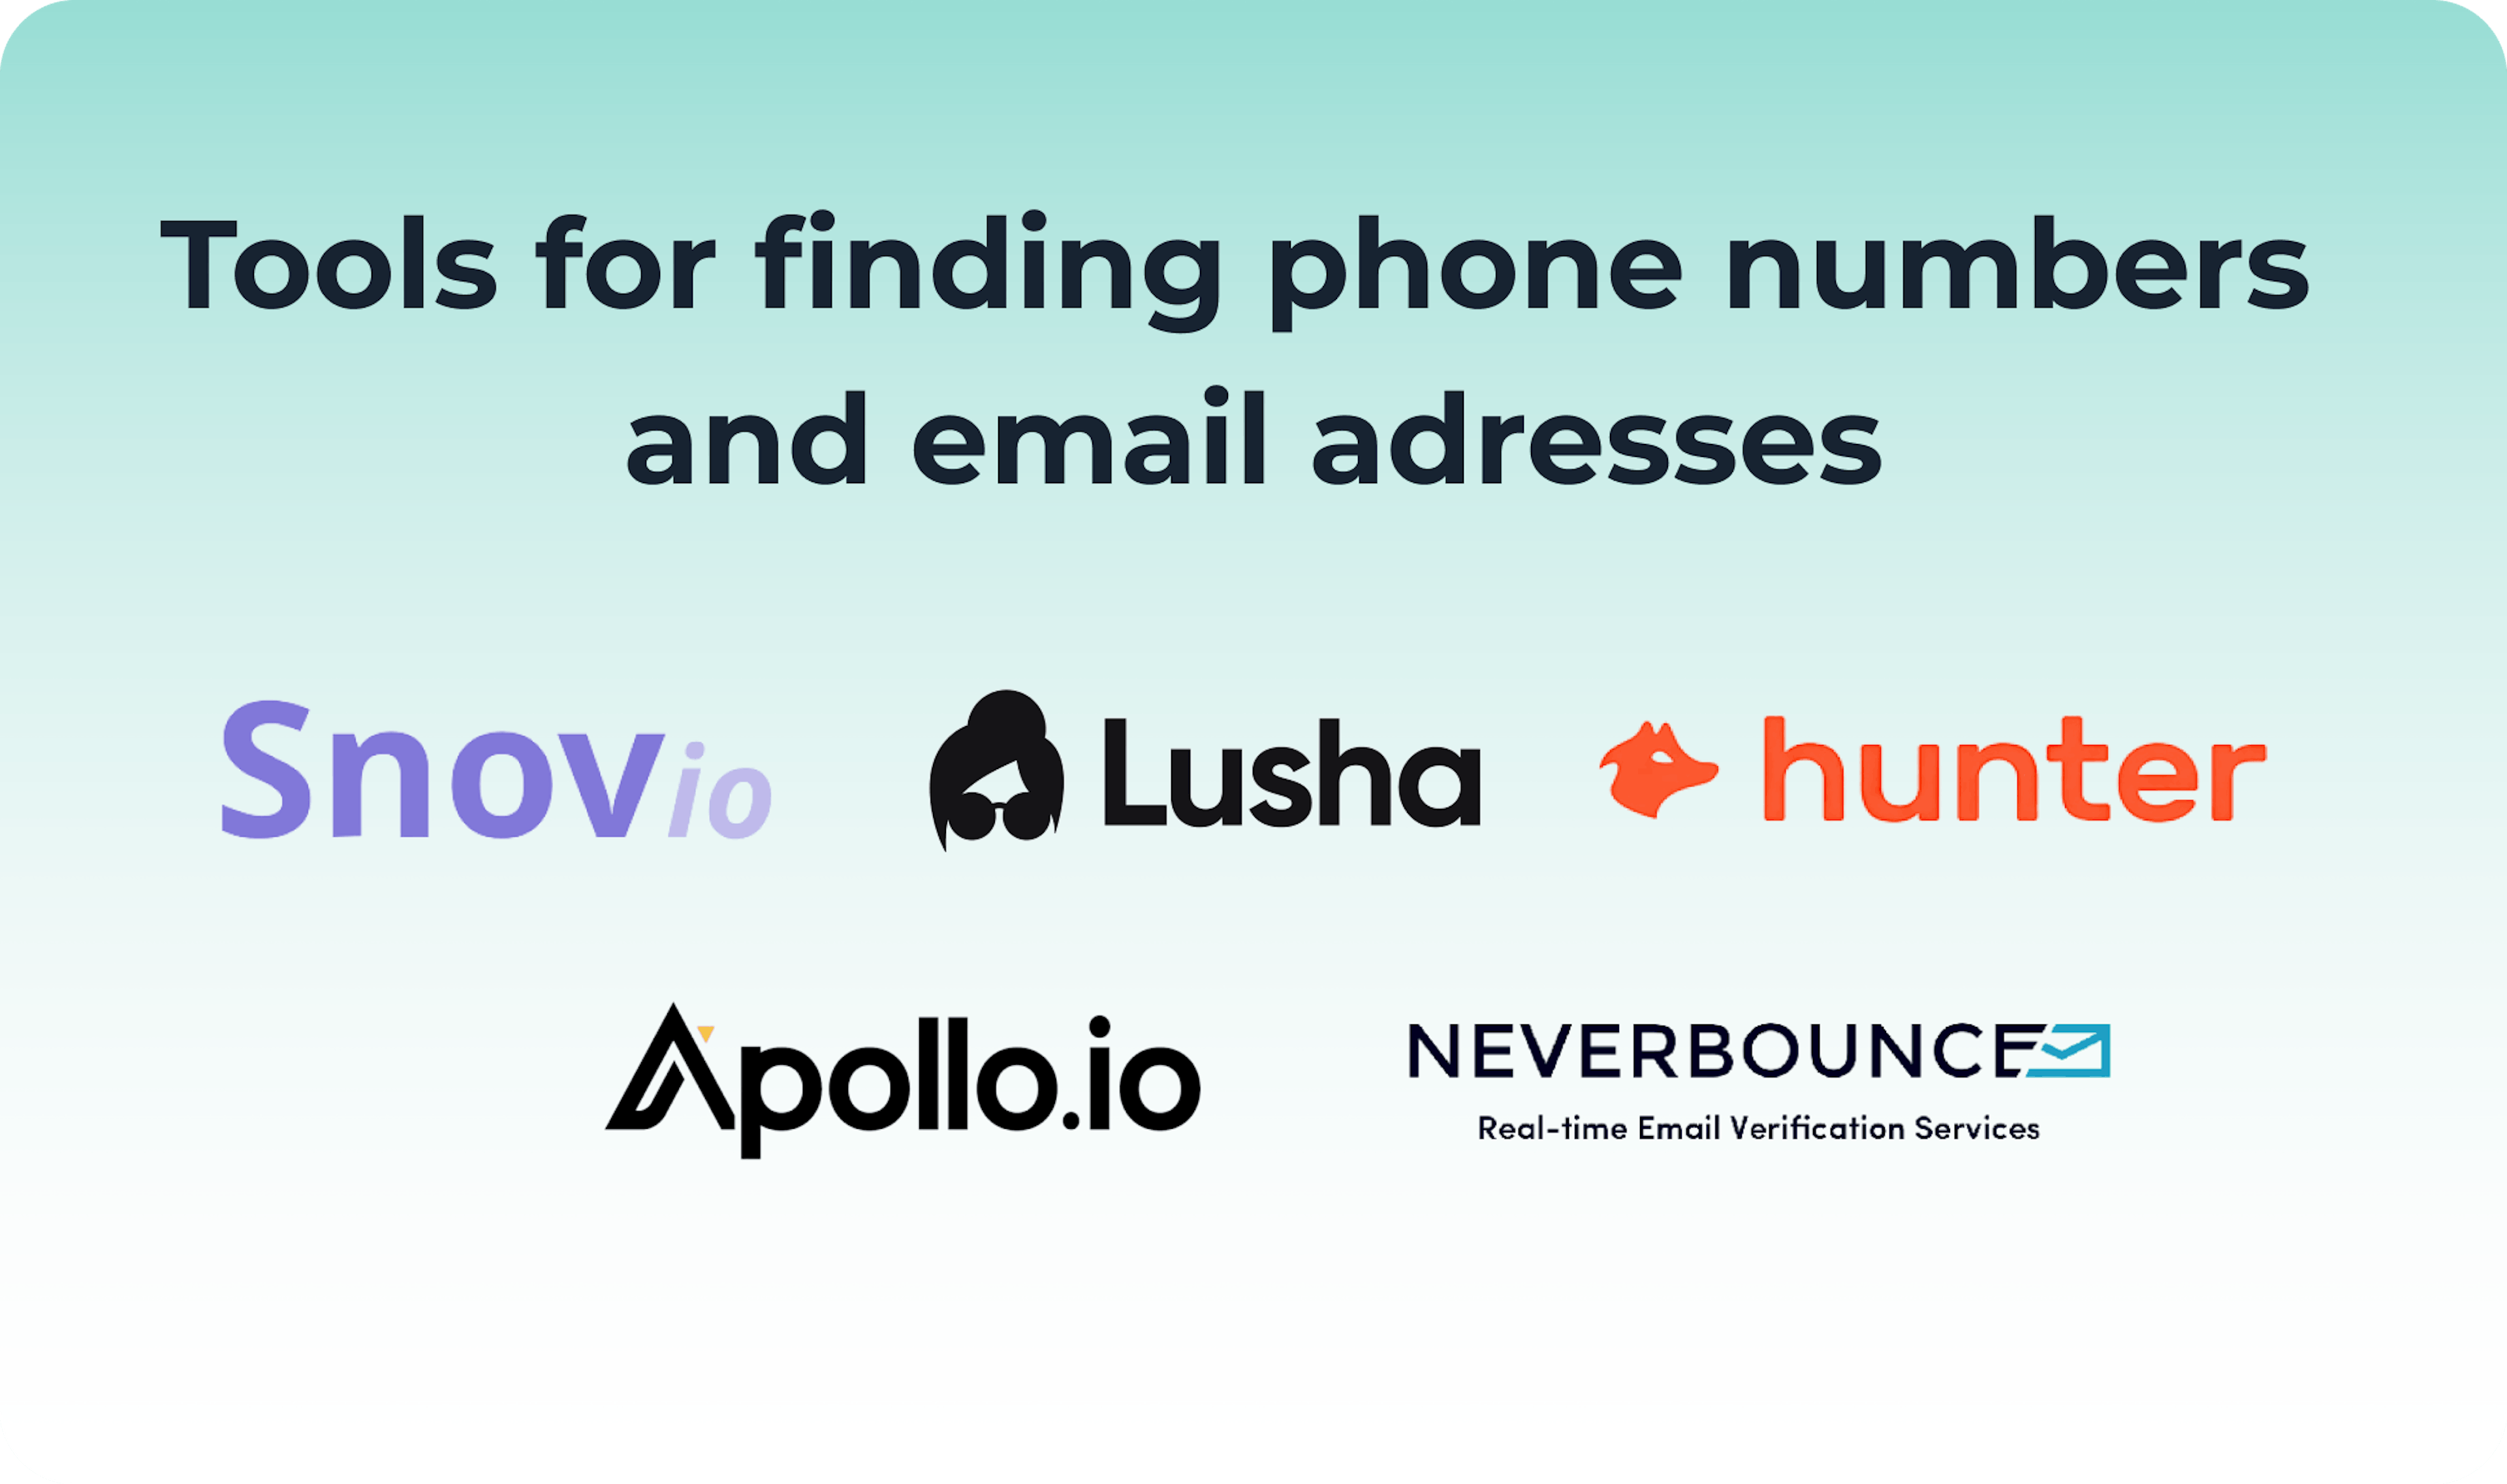 Tools for finding phone numbers